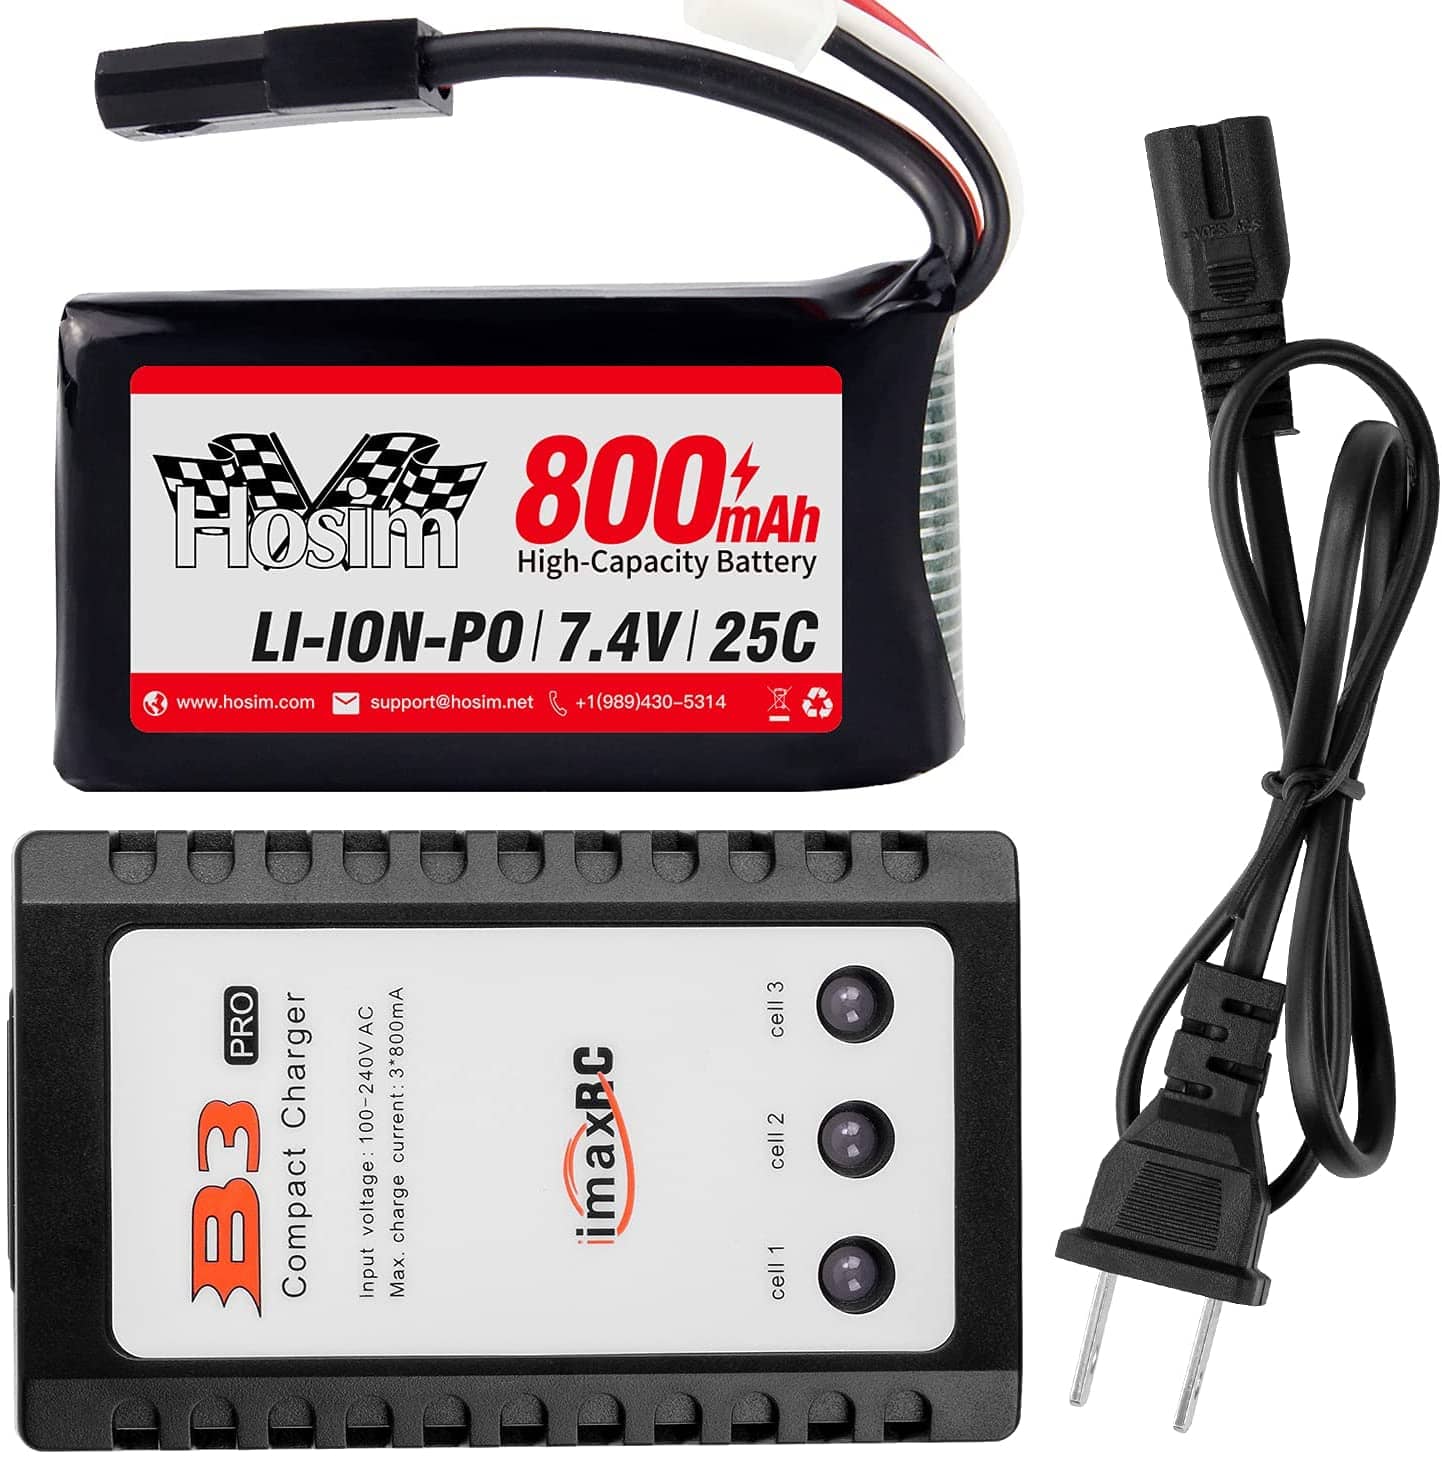 Hosim 7.4V 800mAh RC Car Rechargeable Li-Po Battery & 1pcs Balance Charge,Spare Replacement Parts Assessory for 9130 9135 9136 9138 1/16 Scale All Terrain RC Truck Battery